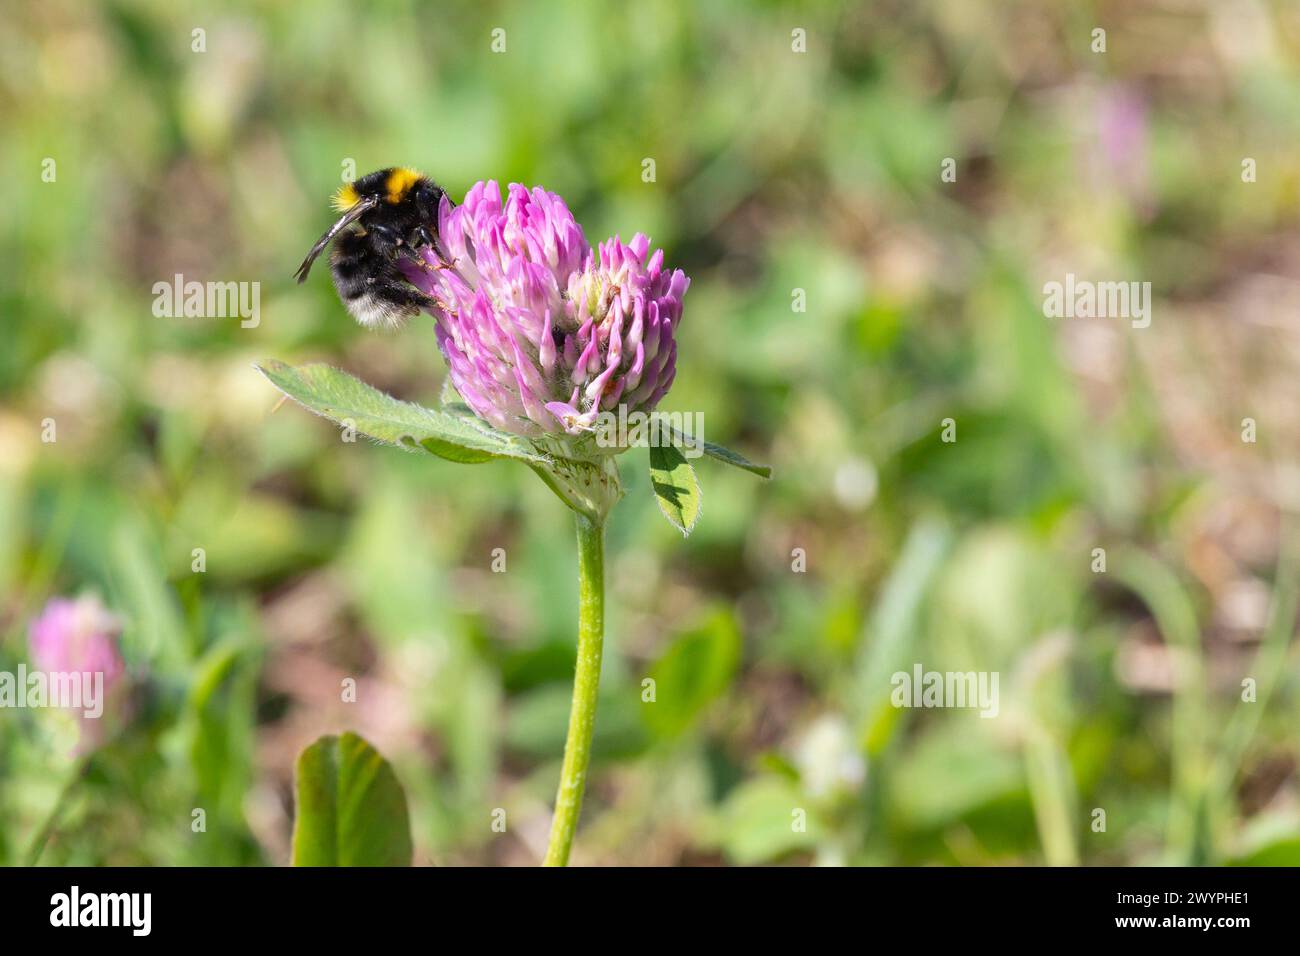 A bumblebee sits on a clover flower Stock Photo